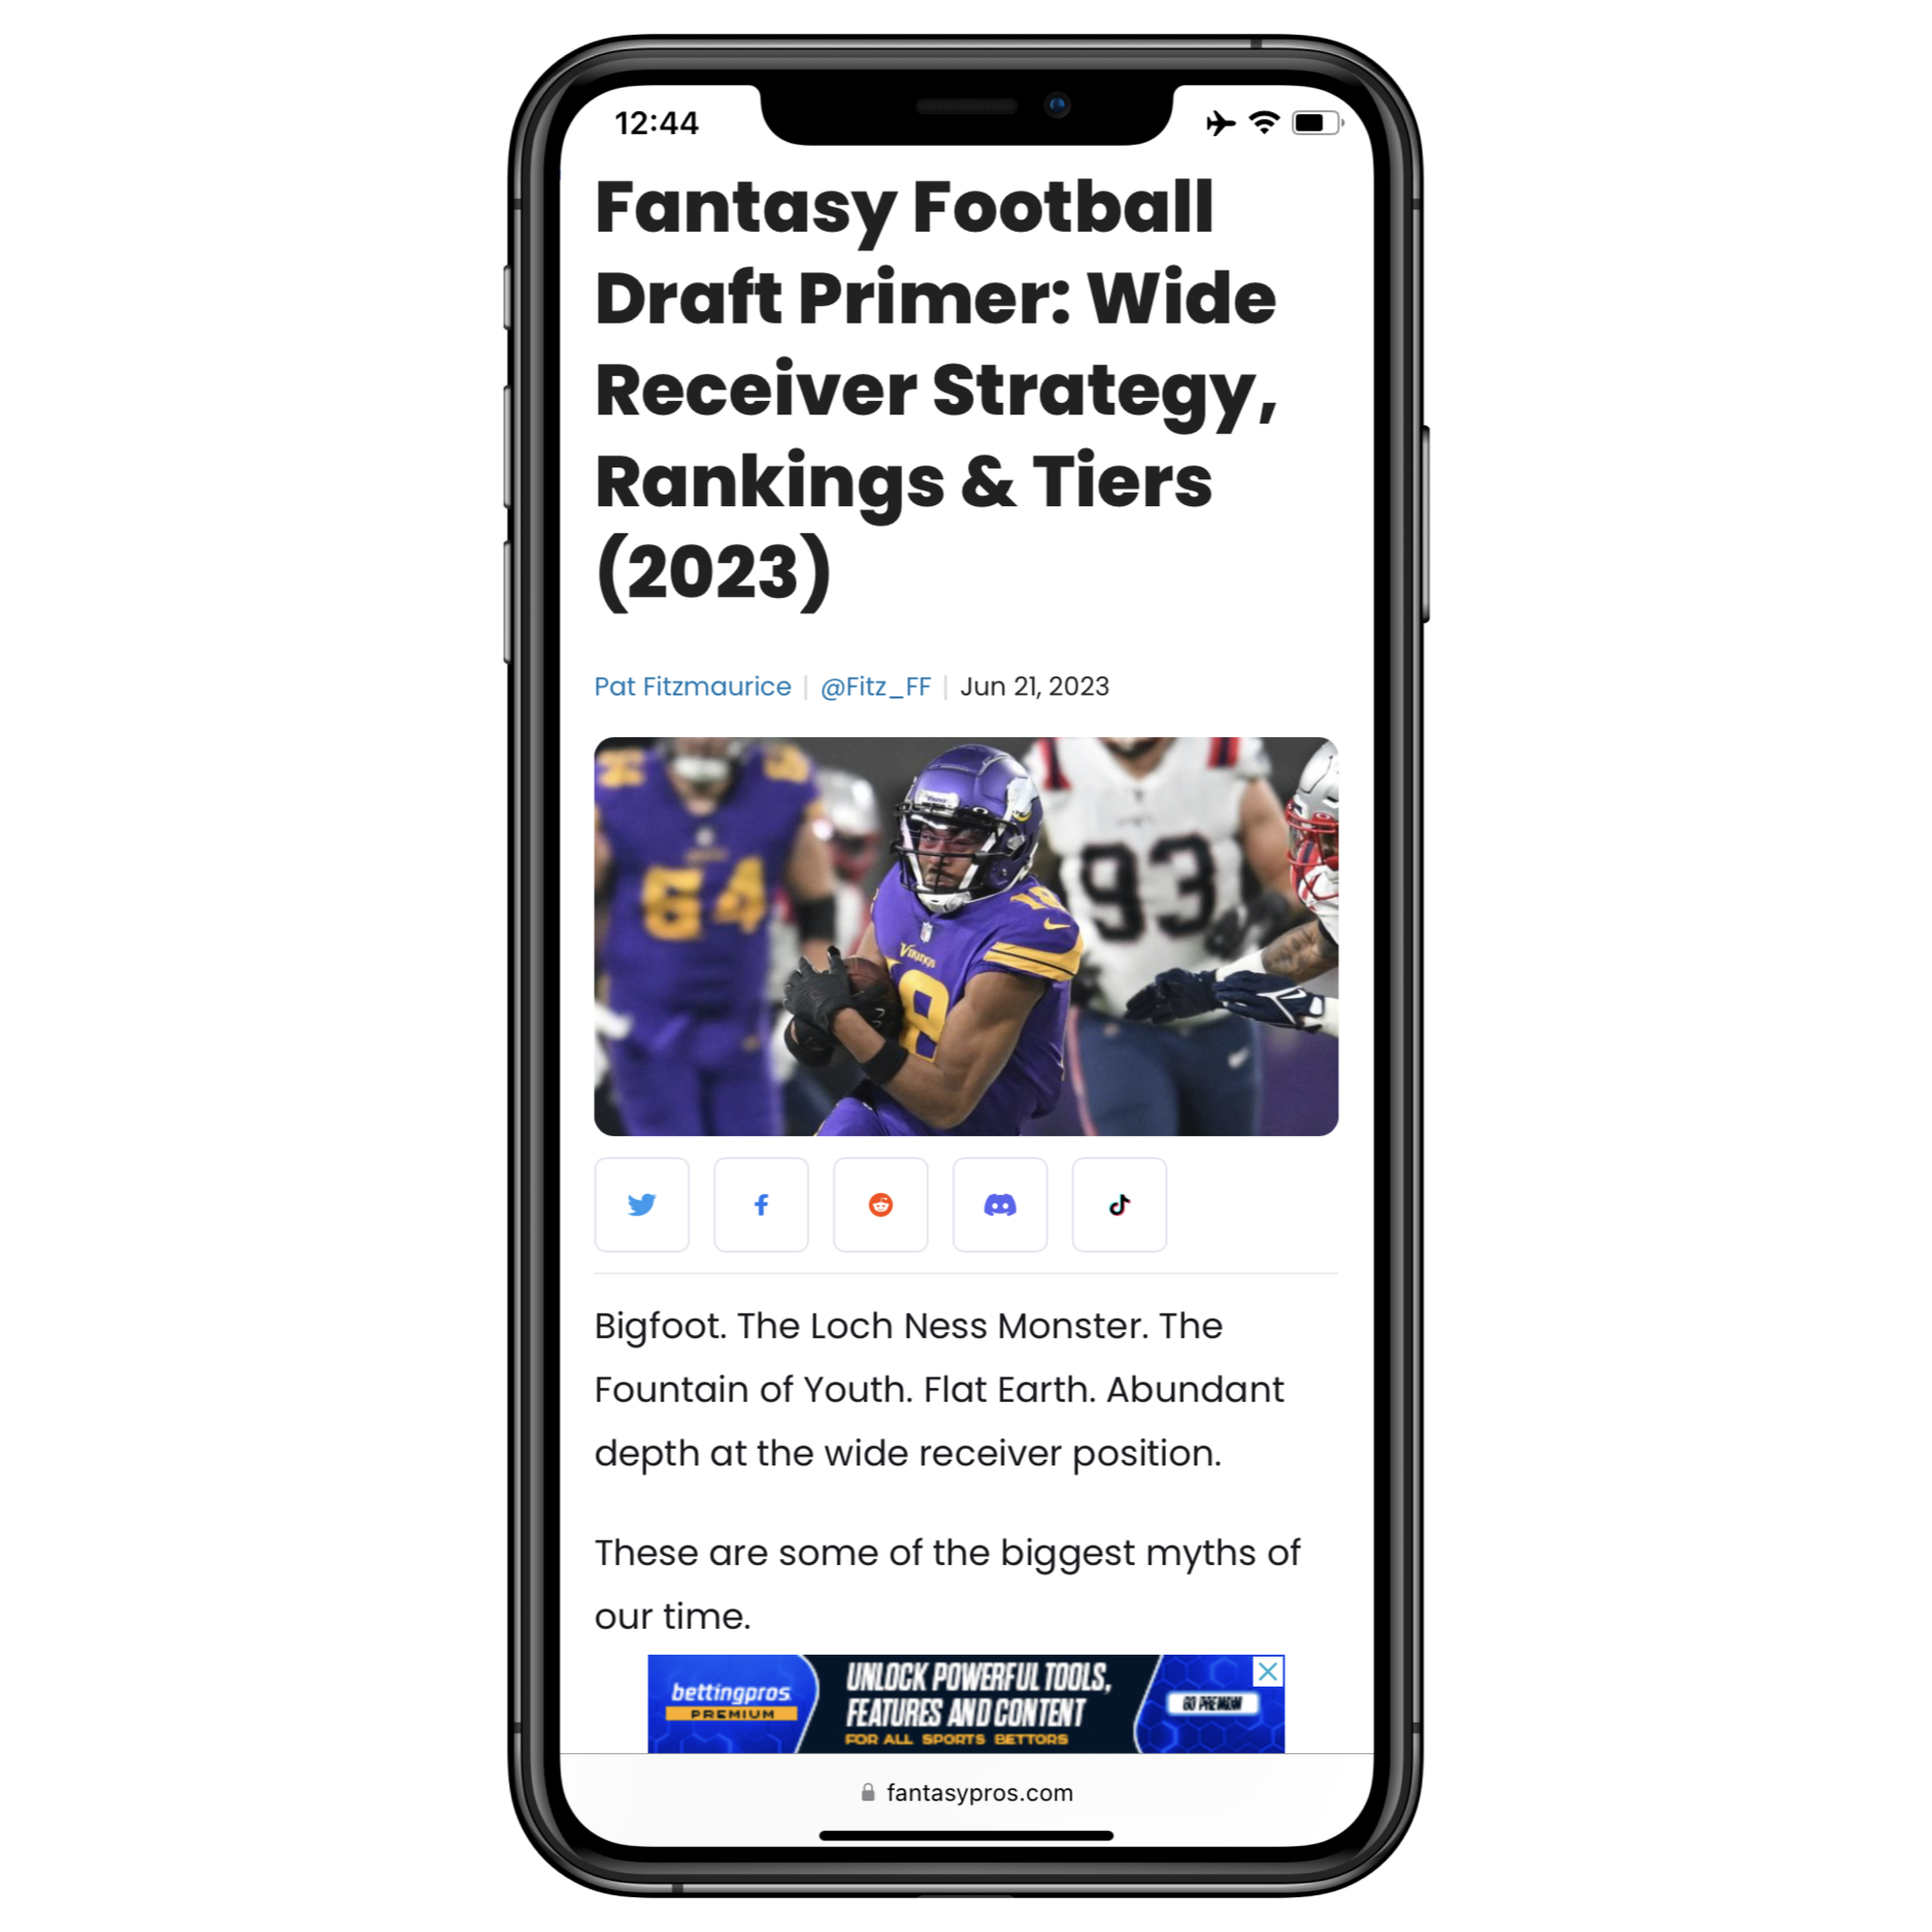 FantasyPros & BettingPros 2023 Updates: A Year in Review